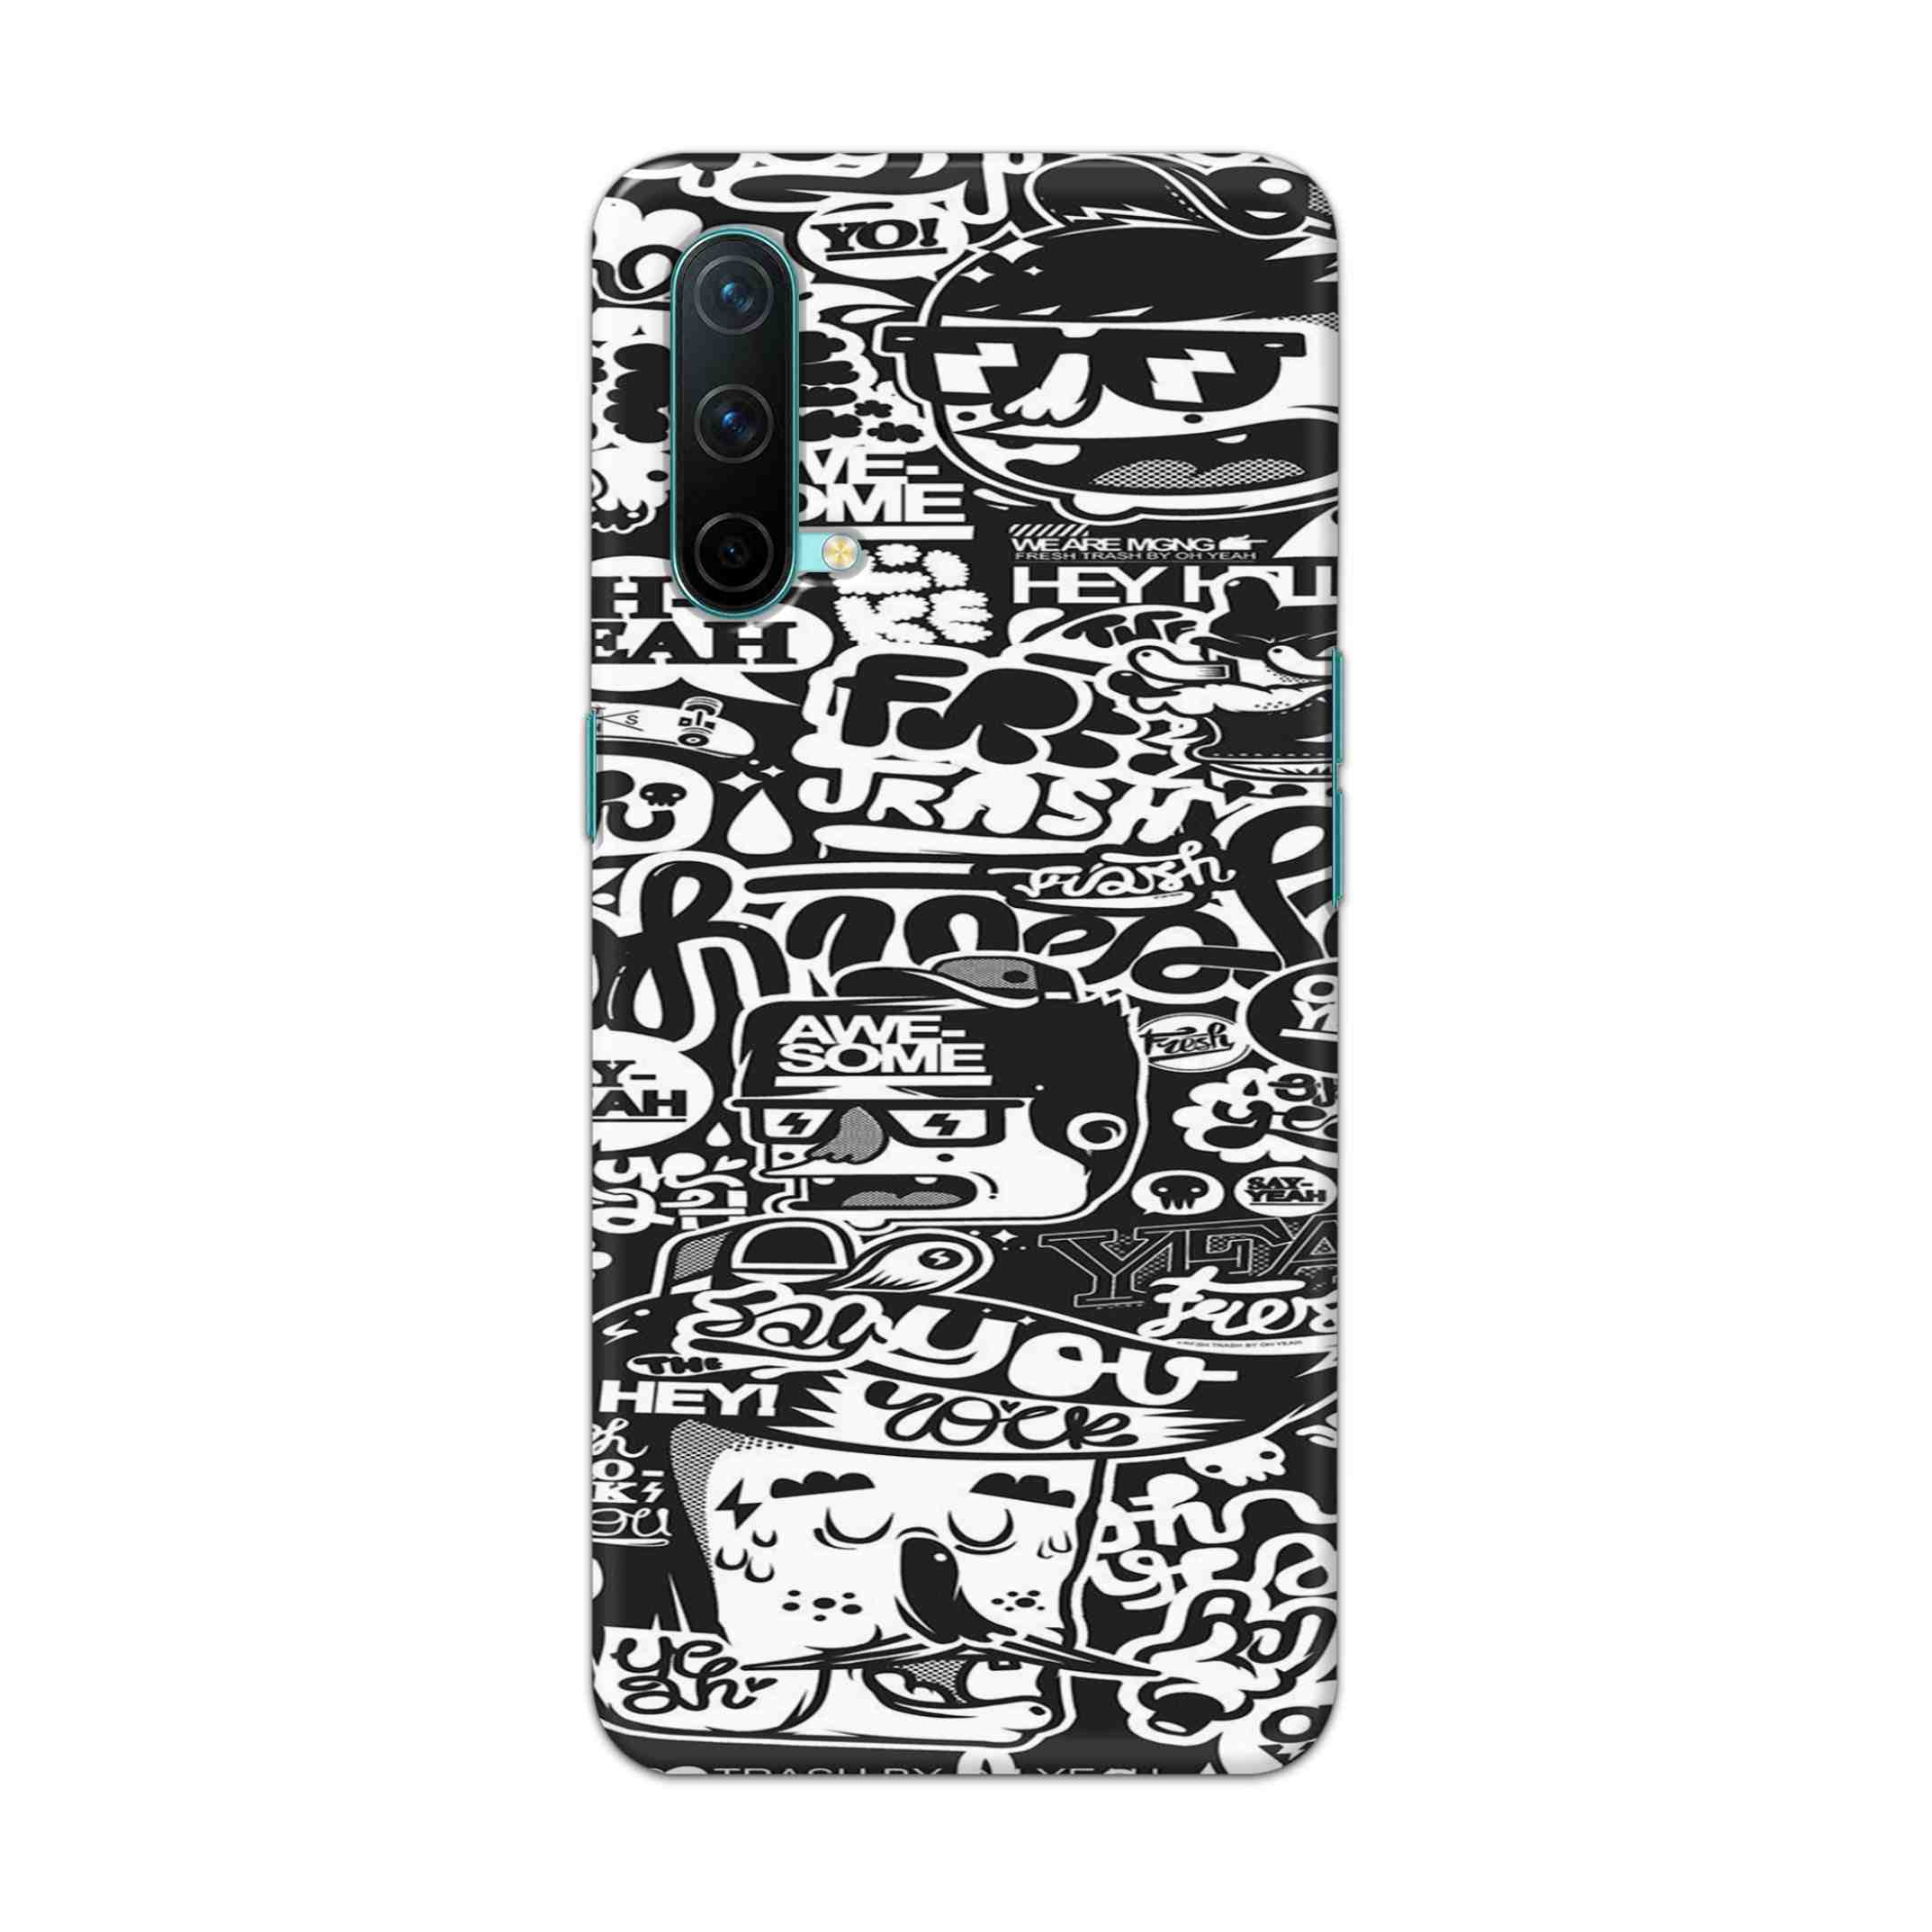 Buy Awesome Hard Back Mobile Phone Case Cover For OnePlus Nord CE Online